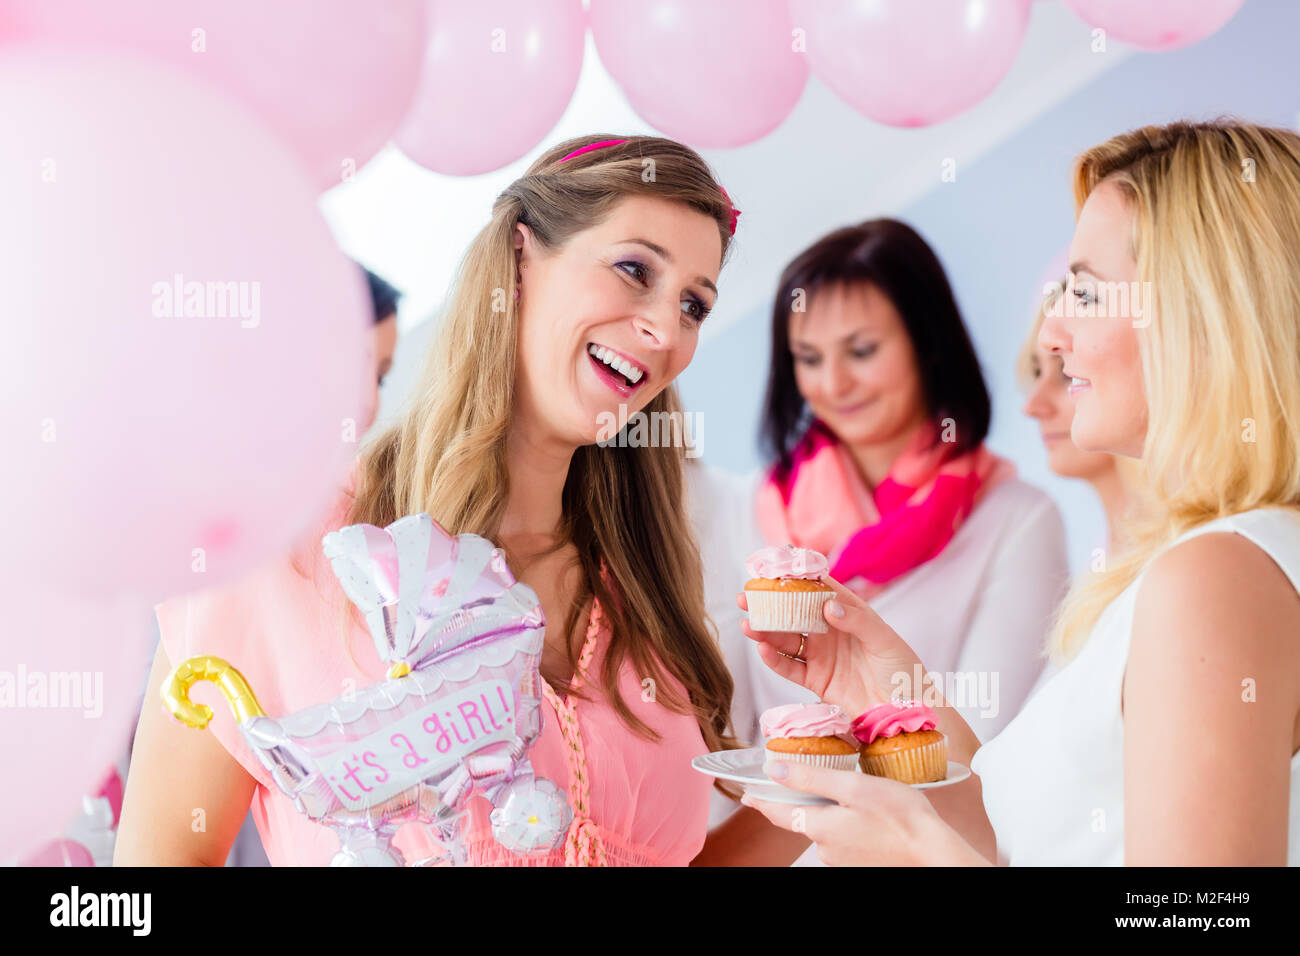 Expecting mother eating cupcake on baby shower party Stock Photo